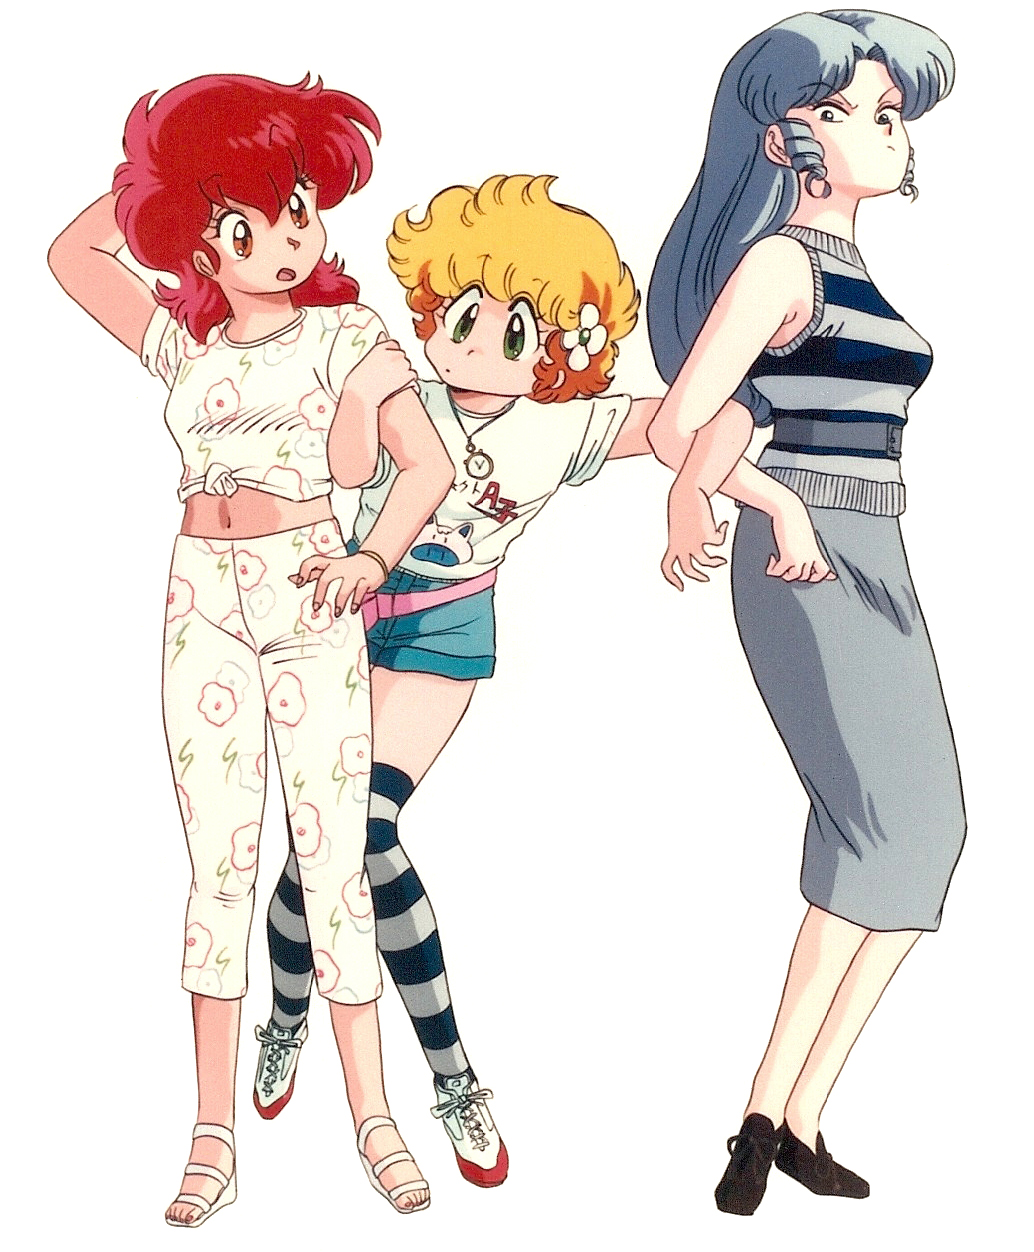 1980s_(style) 3girls arm_behind_head arm_grab arm_up bangs blonde_hair bracelet casual daitokuji_biko drill_locks eyebrows_visible_through_hair floral_print flower green_eyes hair_flower hair_ornament highres jewelry kotobuki_shiiko long_hair magami_eiko multiple_girls official_art open_mouth project_a-ko red_eyes redhead retro_artstyle sandals scan scowl shirt shoes short_hair short_sleeves shorts silver_hair simple_background sneakers standing striped striped_legwear thigh-highs tied_shirt white_background